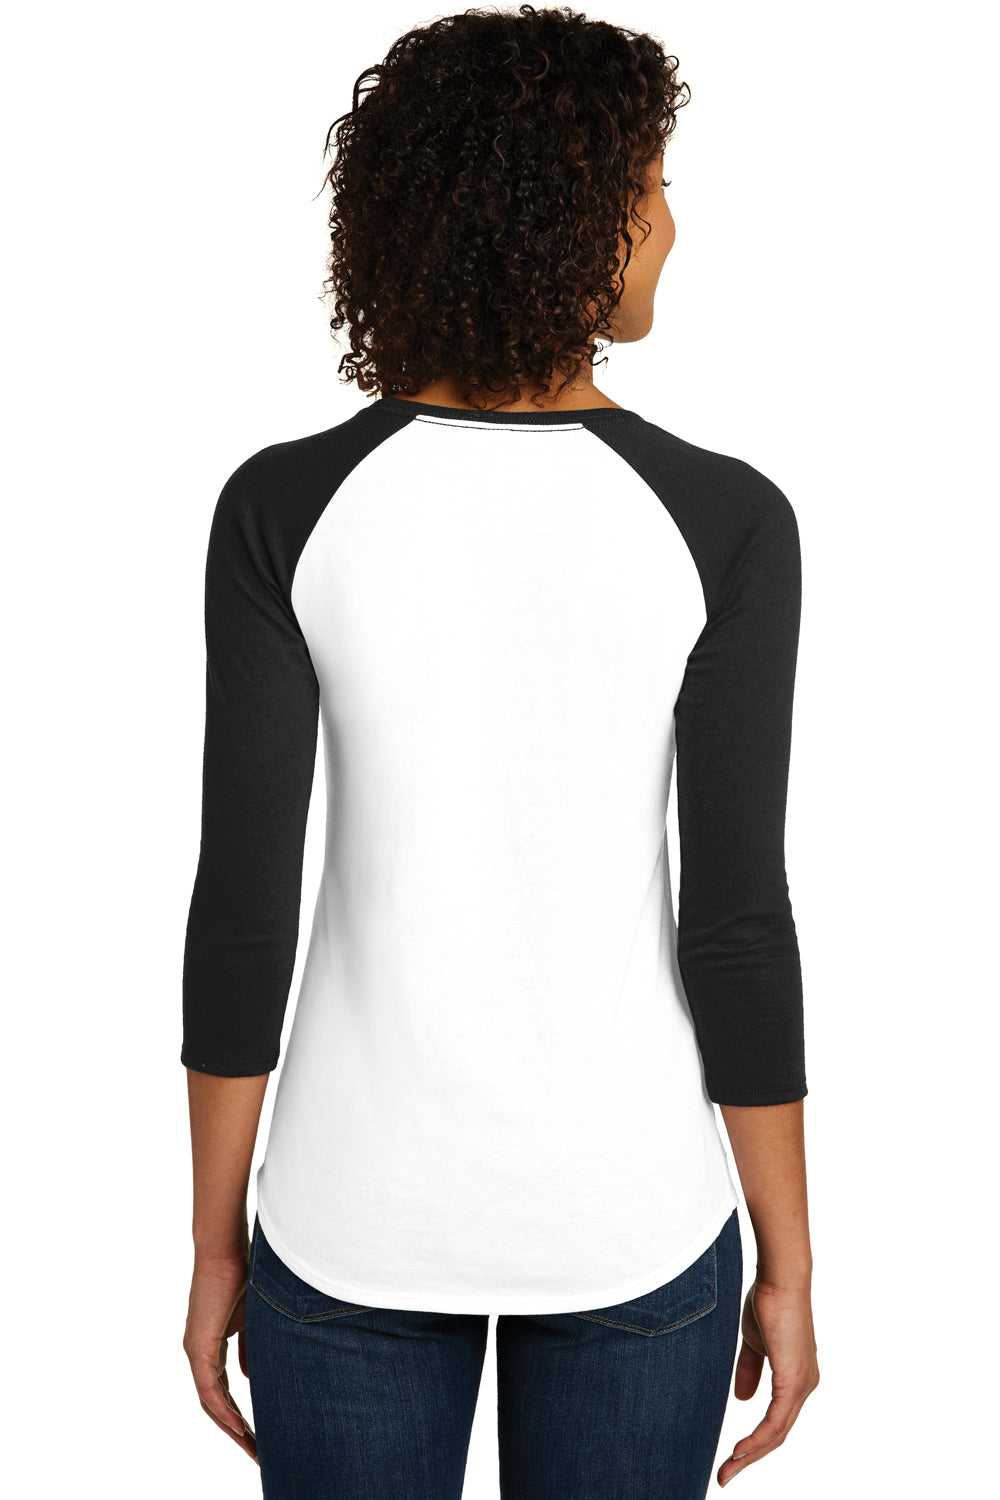 District DT6211 Womens Very Important 3/4 Sleeve Crewneck T-Shirt White/Black Back